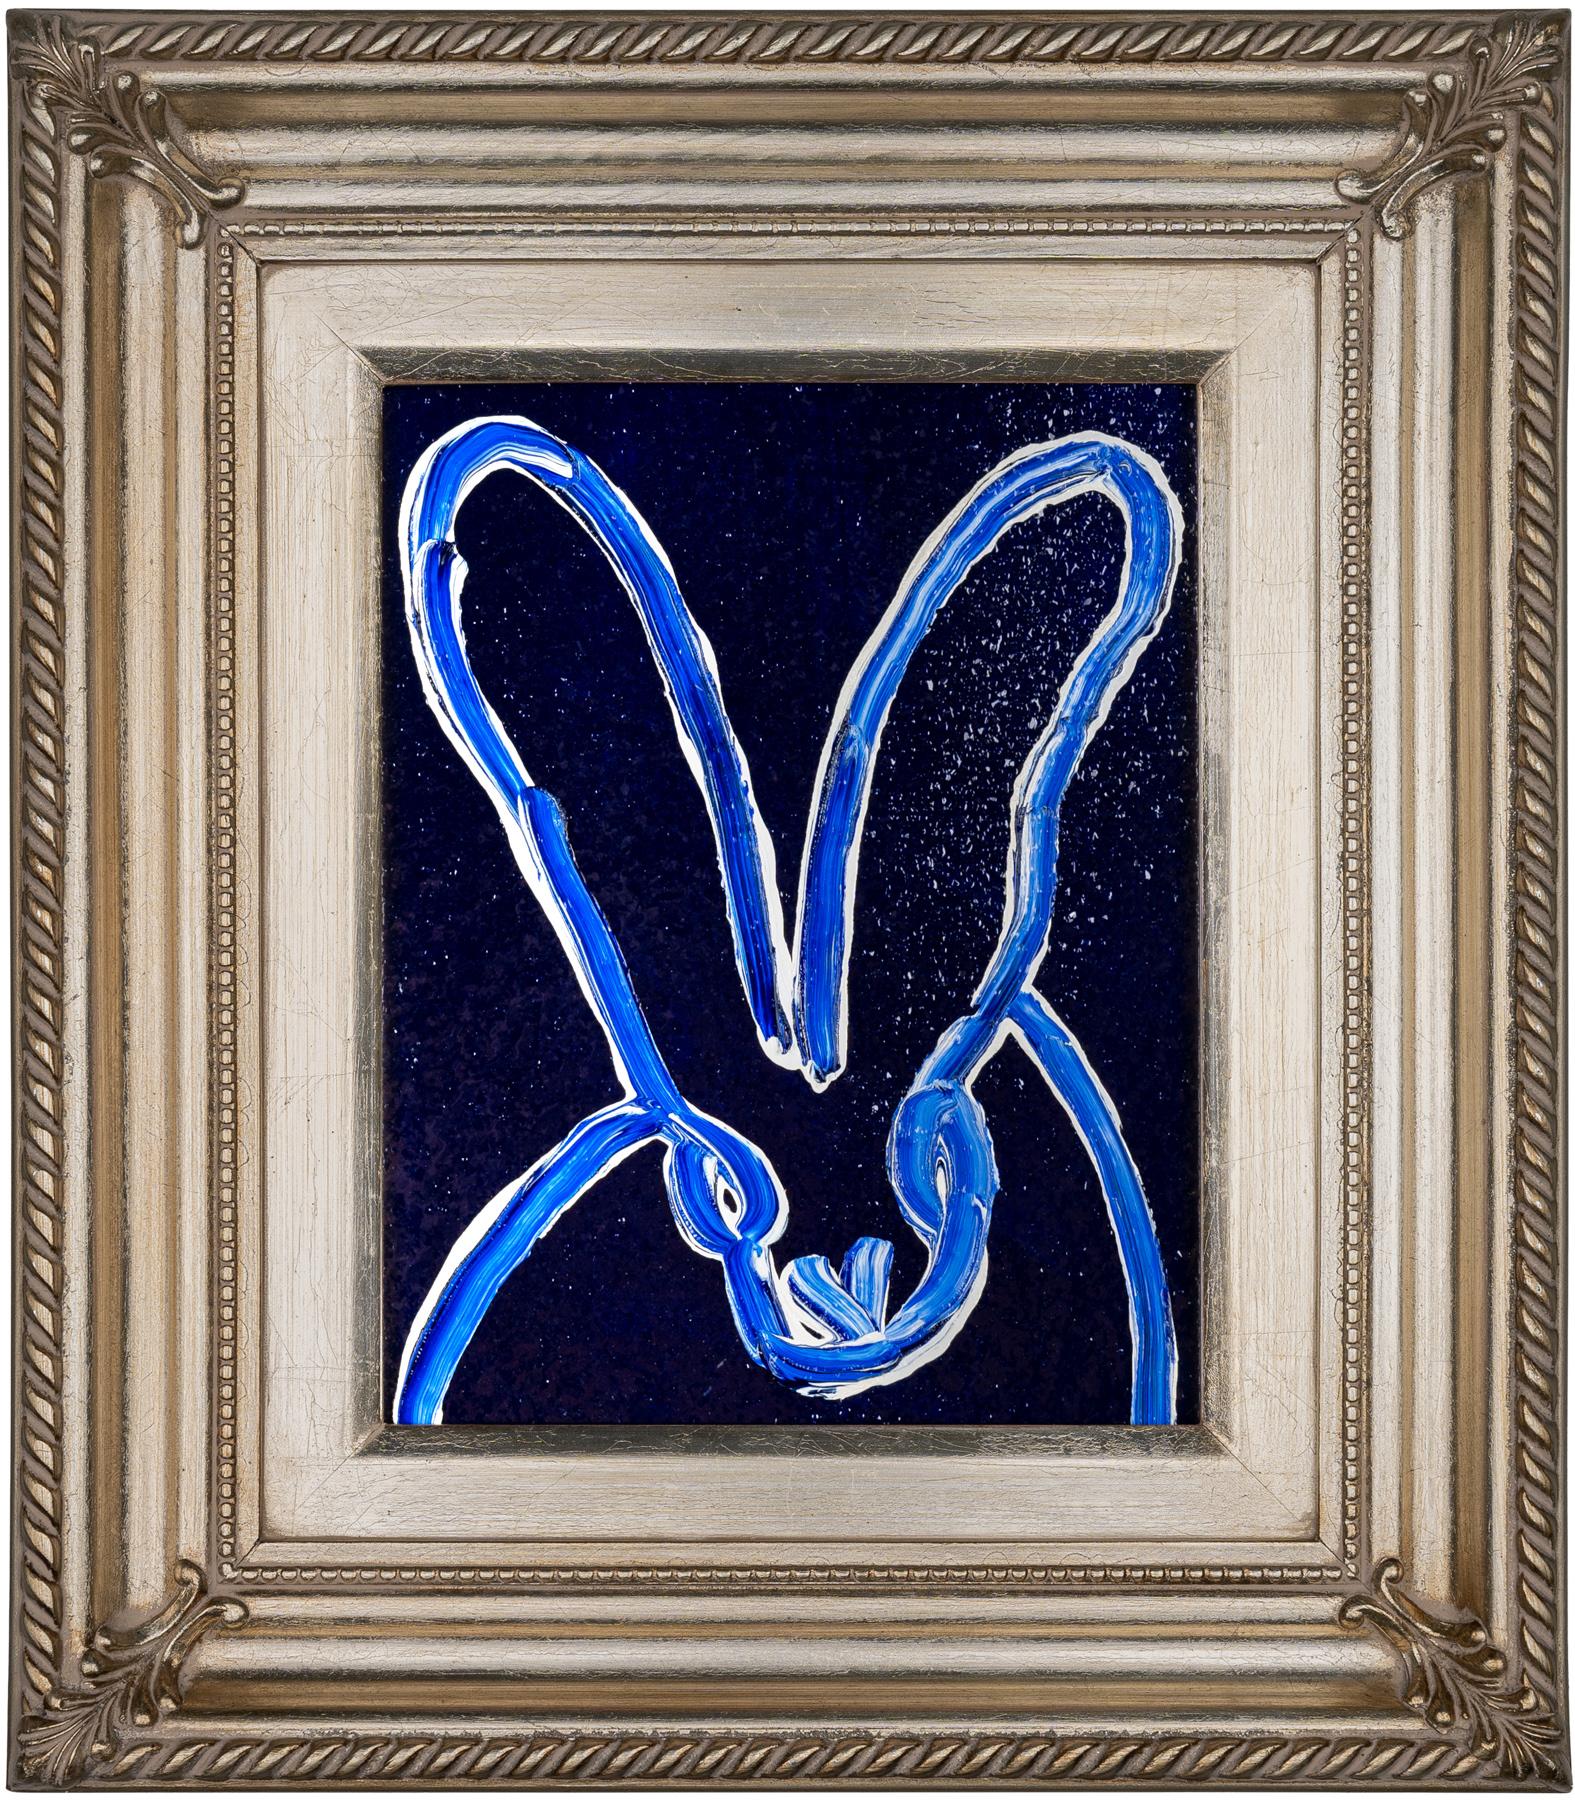 Hunt Slonem bunny oil painting 'Blue Tanzanite Tango' 2023. Oil and acrylic with diamond dust on wood, 10 x 8 in. / Frame: 16 x 14 in. This painting features Slonem's signature bunny outlined in blue and white over a cobalt blue, diamond dust